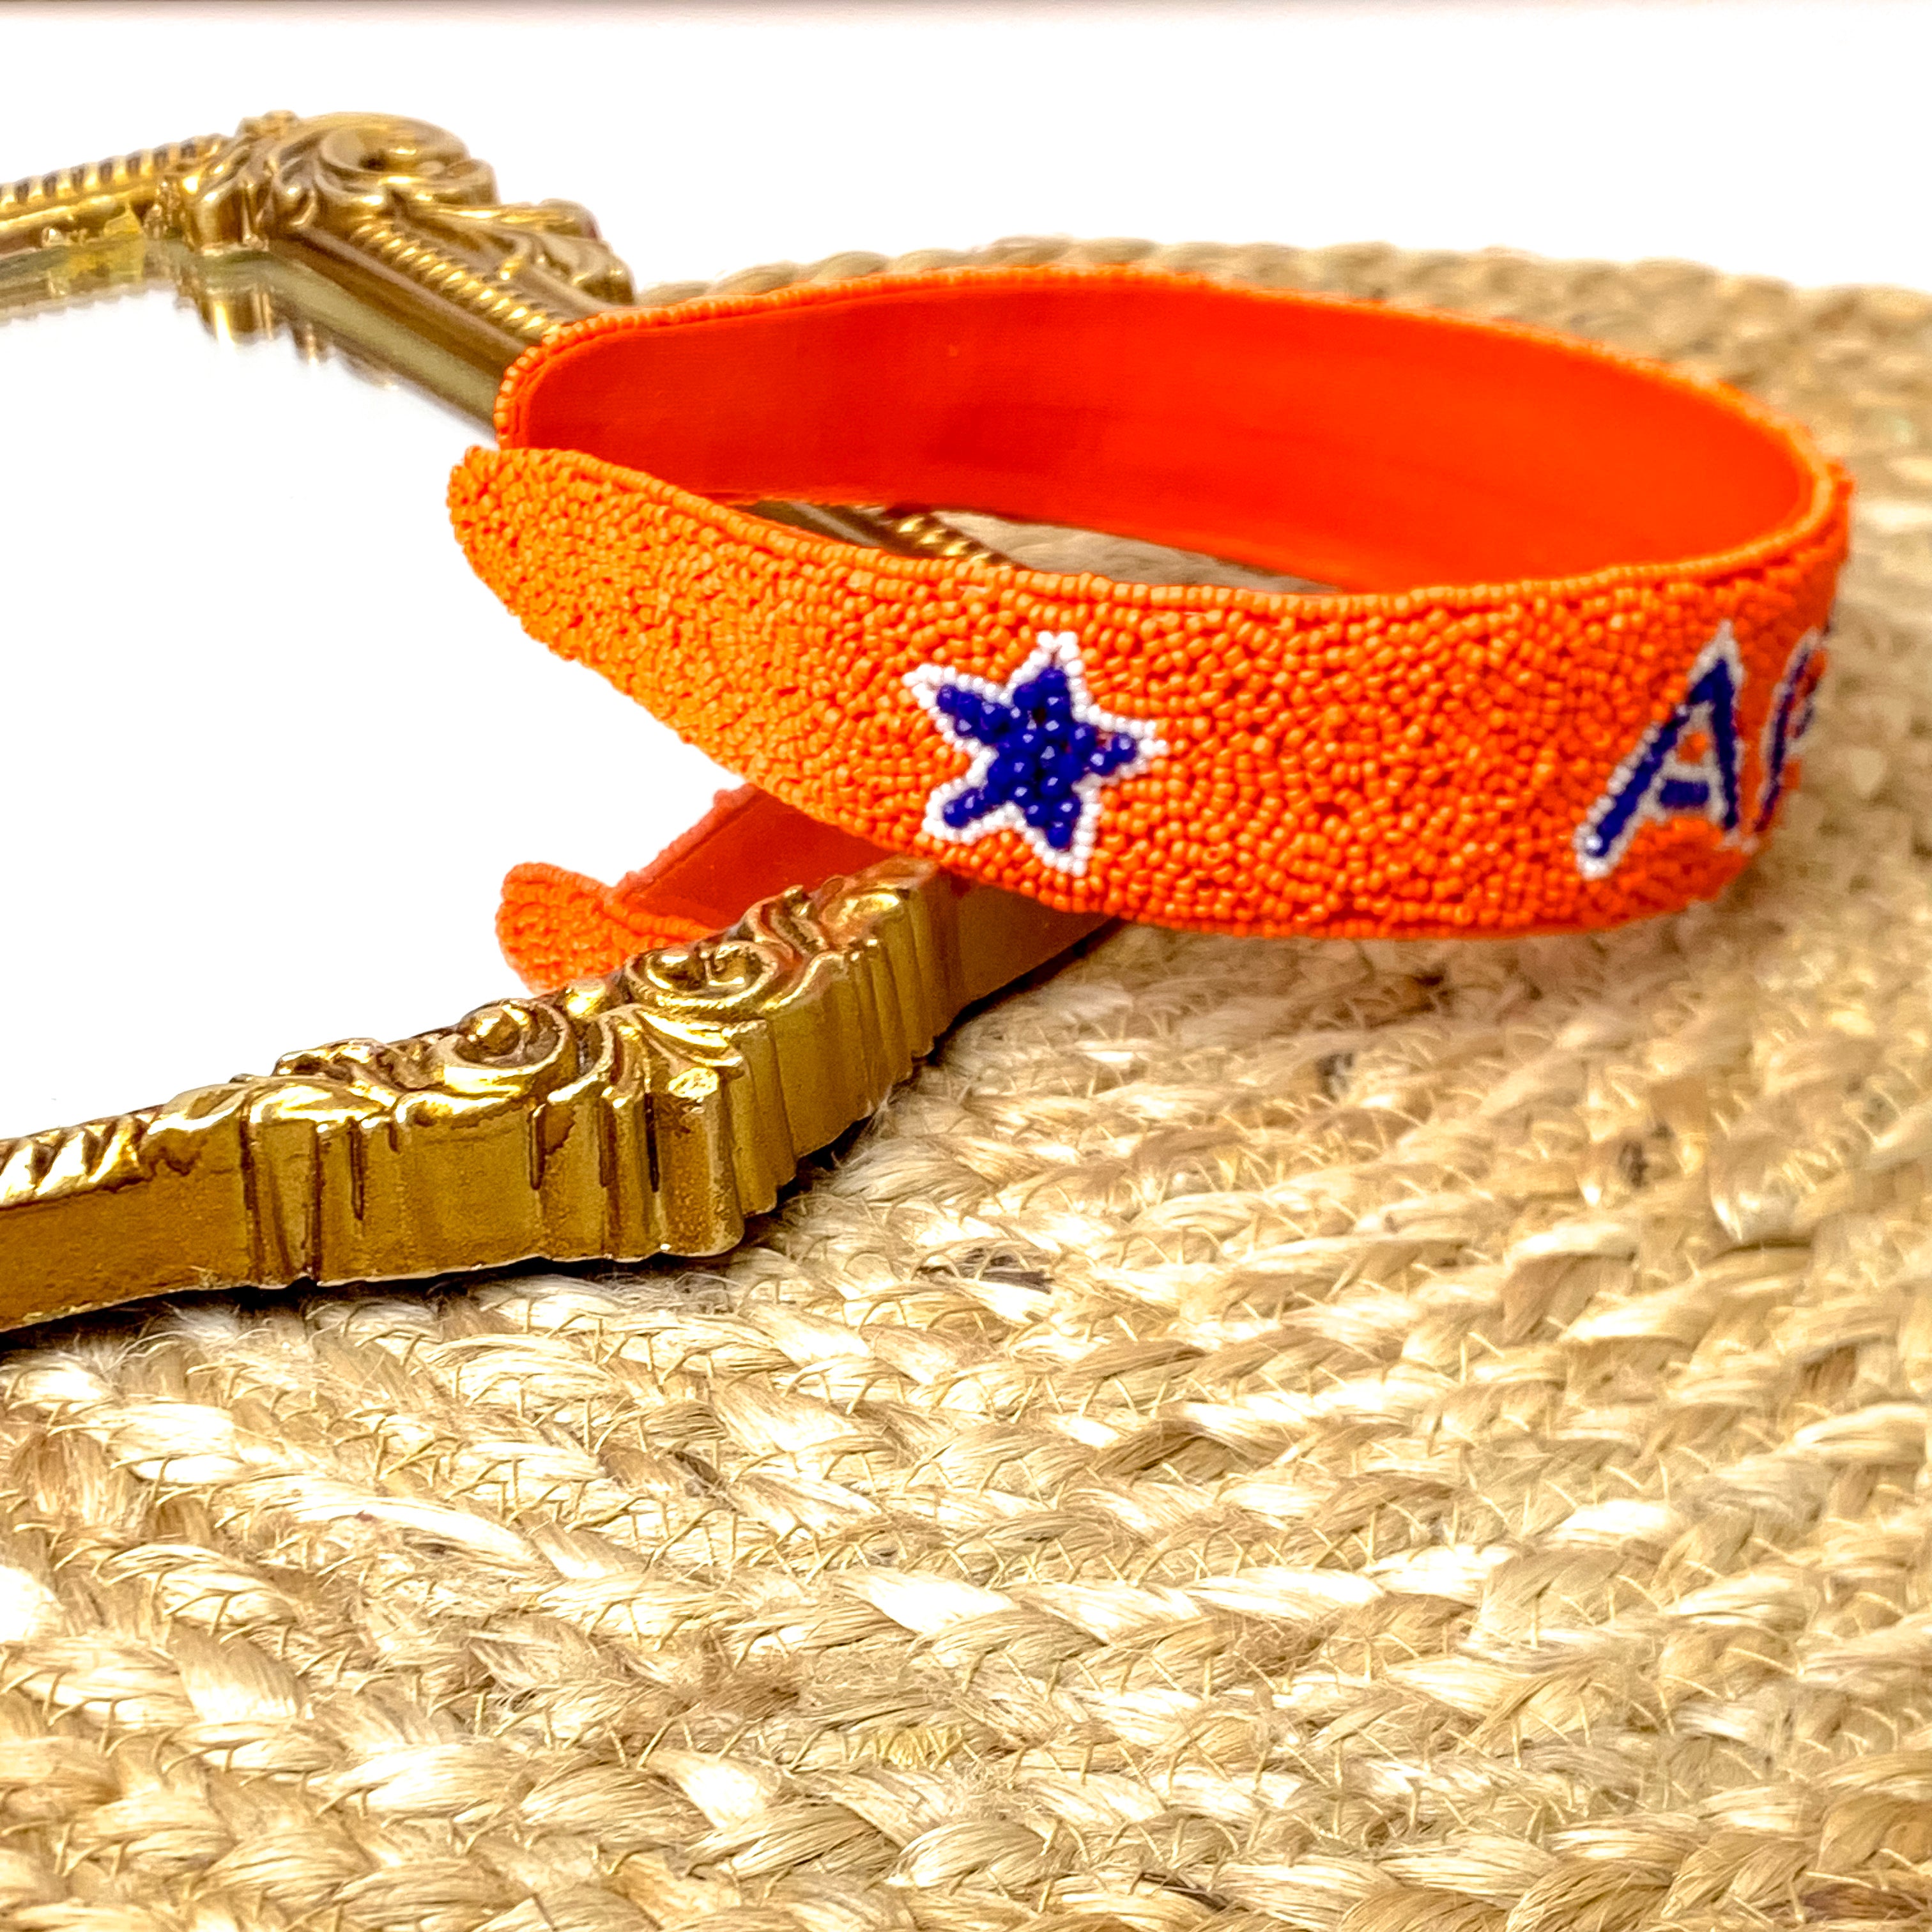 Team Spirit Astros Orange Seed Bead Headband with Navy Blue and White Stars - Giddy Up Glamour Boutique